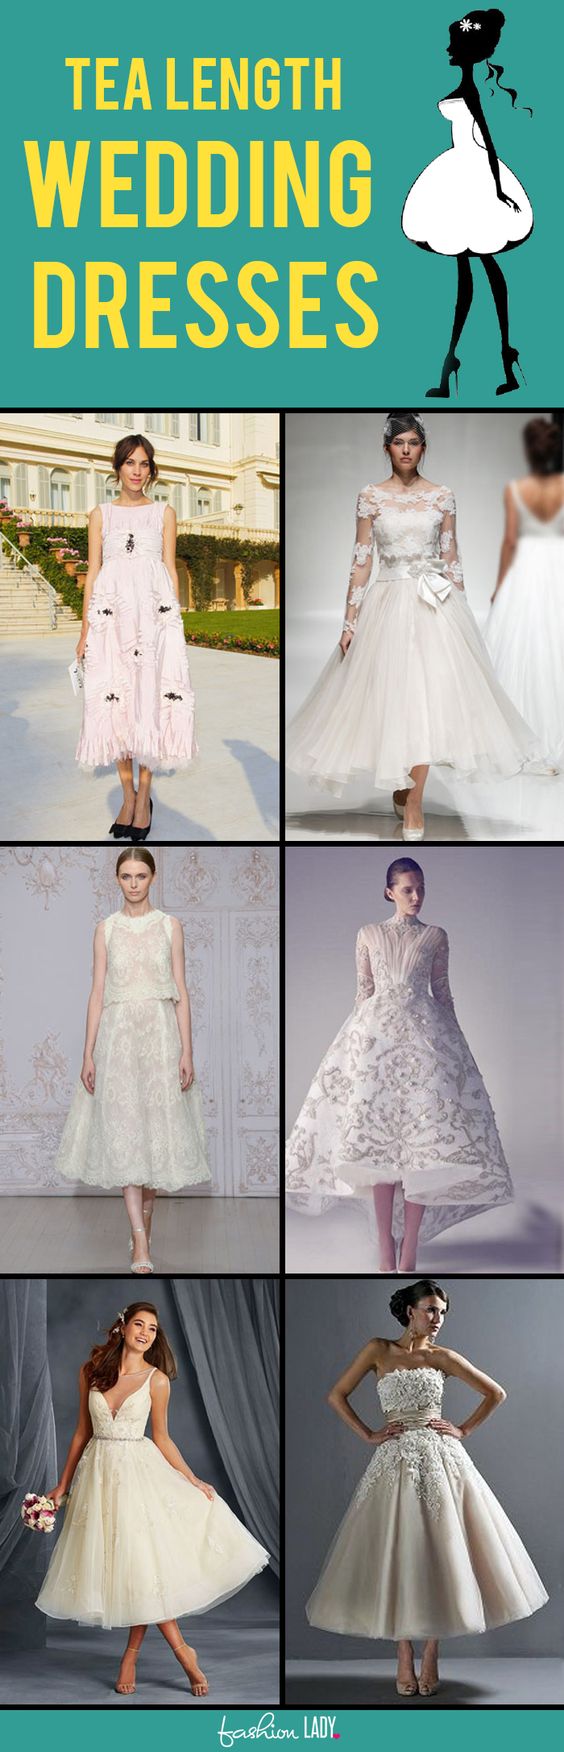 Tea Length Wedding Dresses: How To Style Them Right?